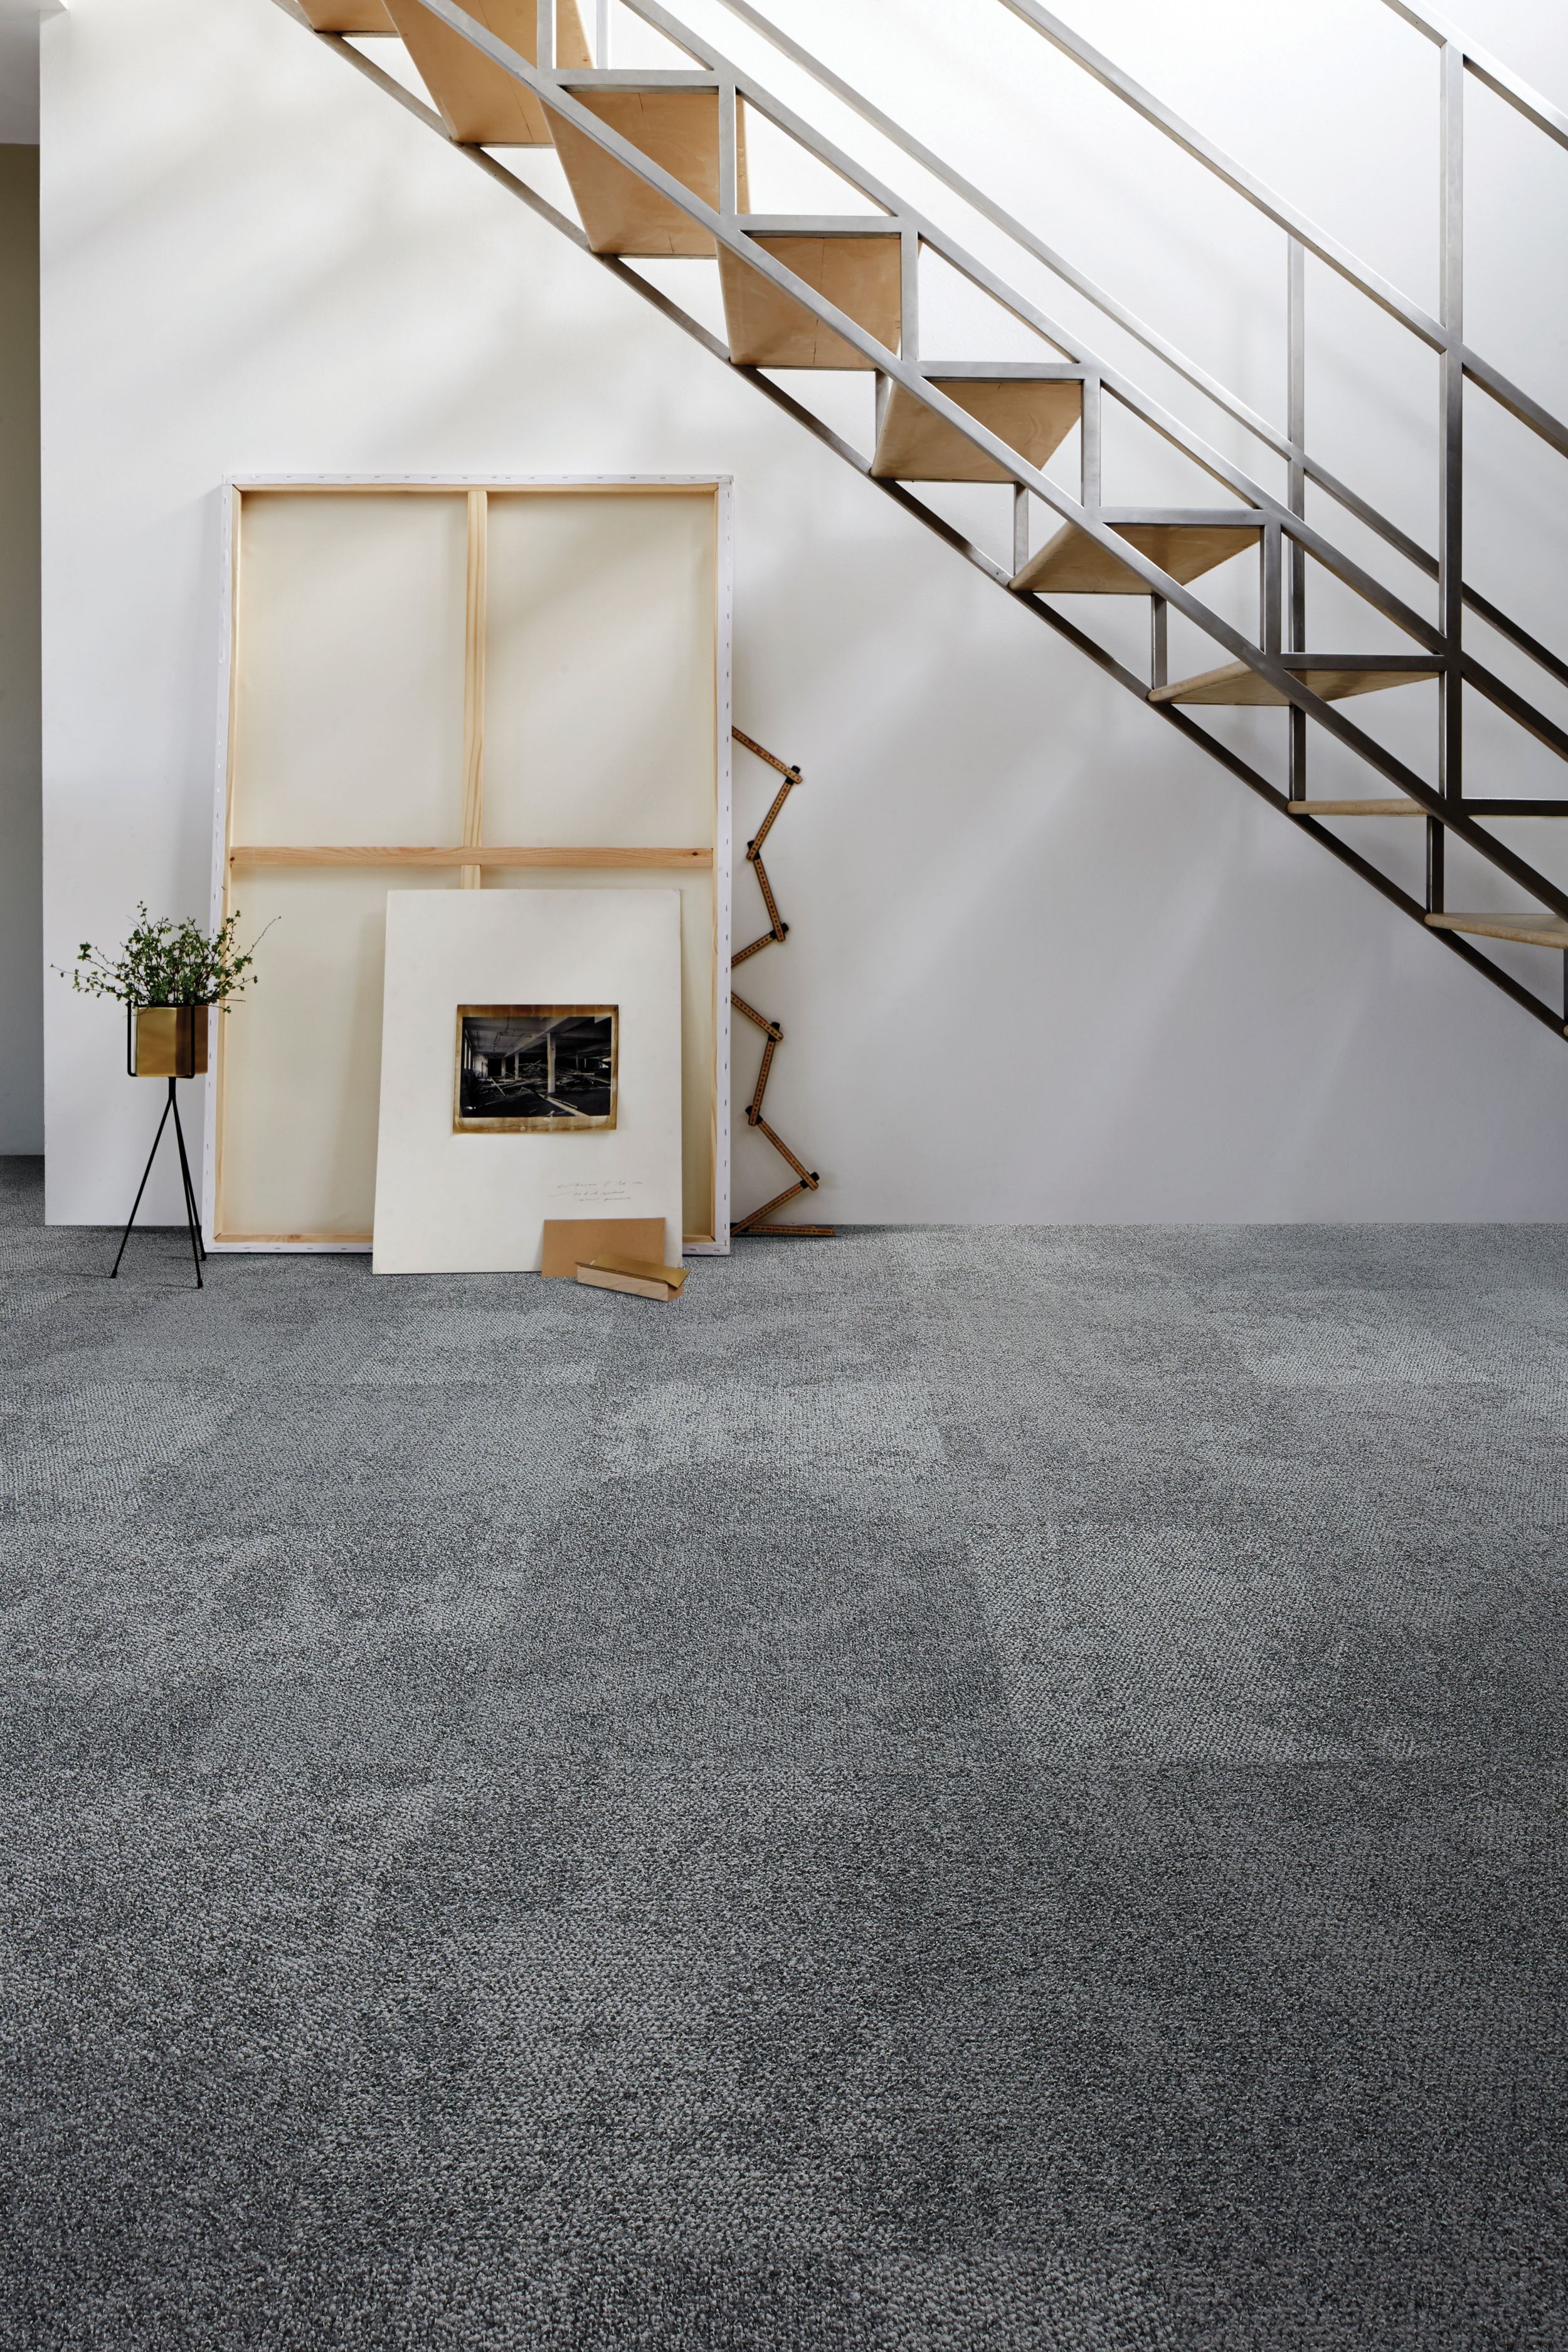 Interface Composure carpet tile with stairs in background Bildnummer 4